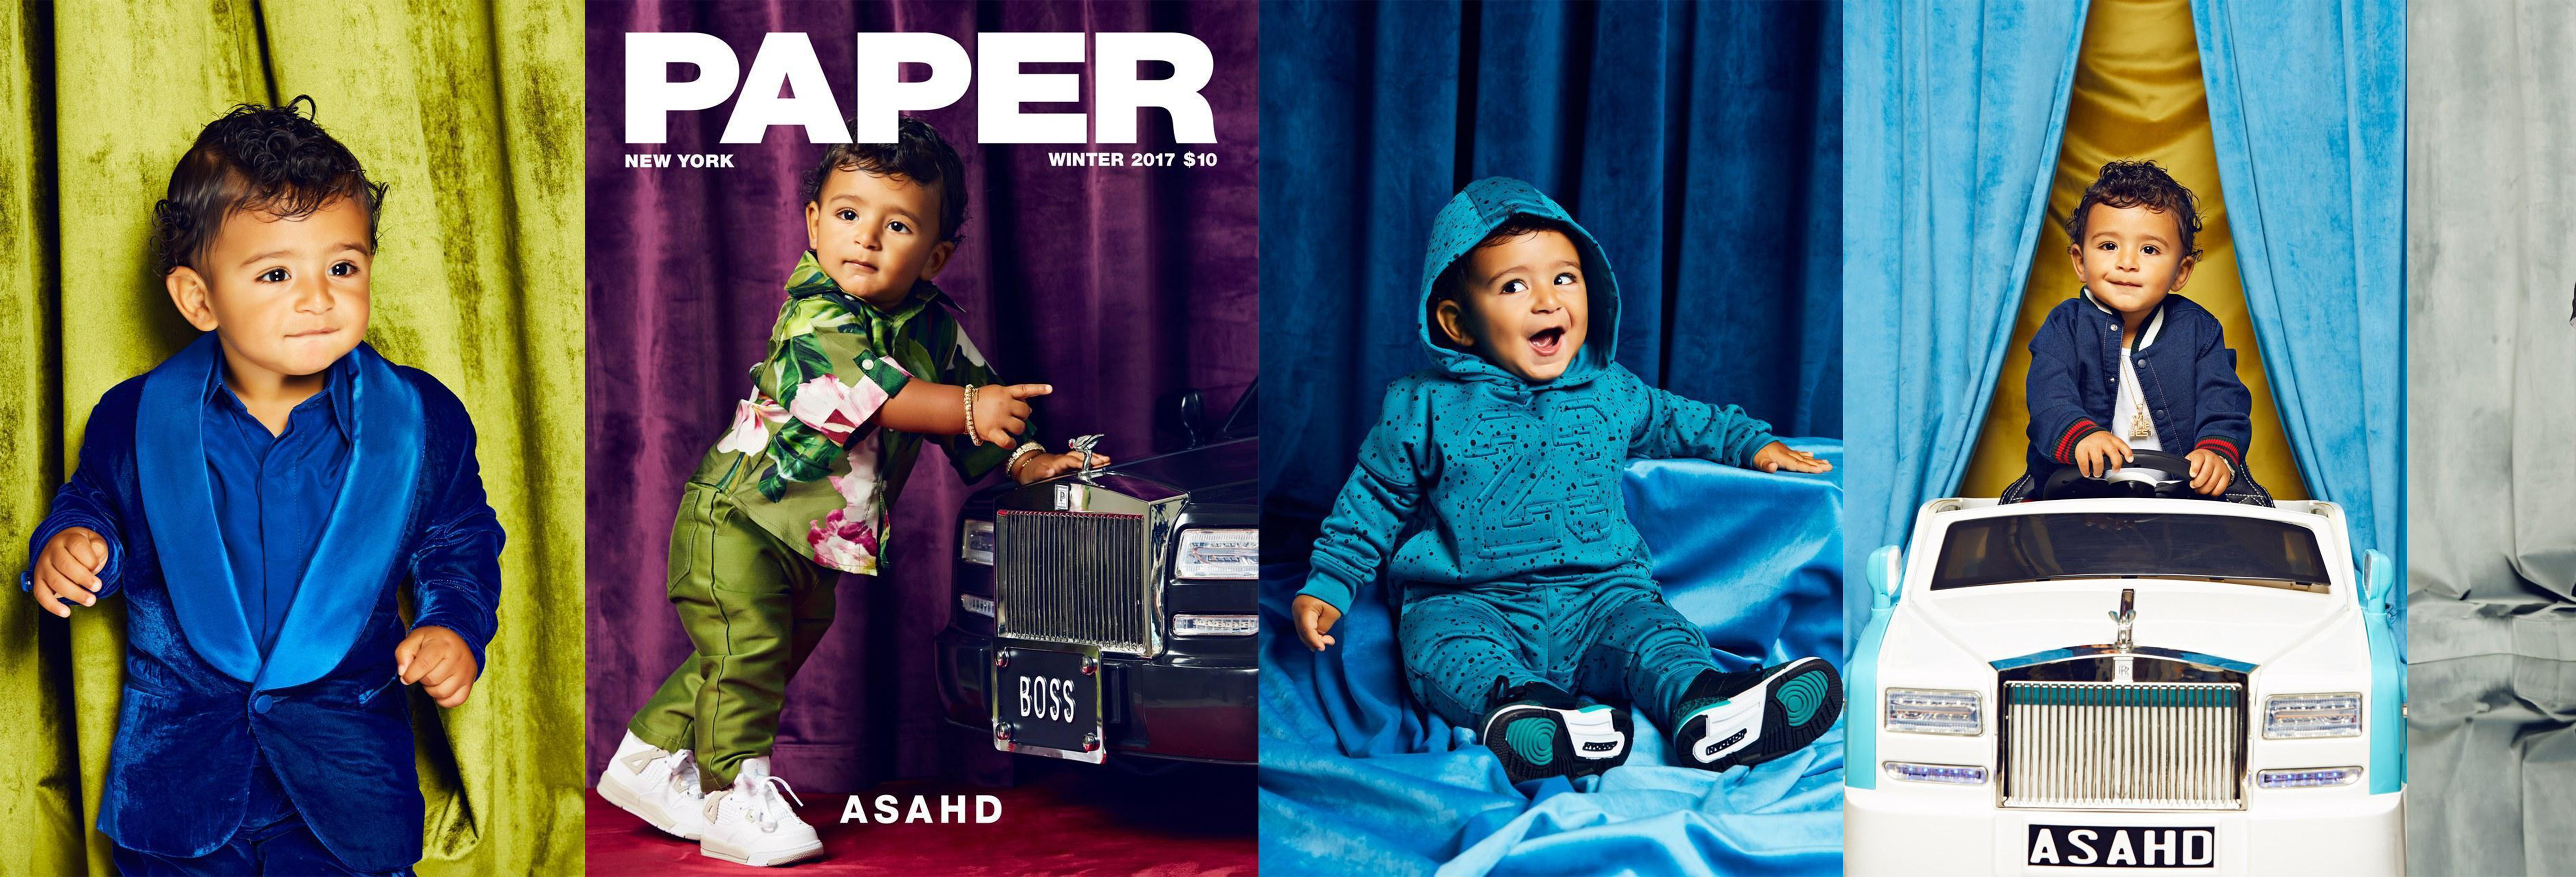 Asahd Khaled: Breaking The Internet With His Paper Magazine Cover